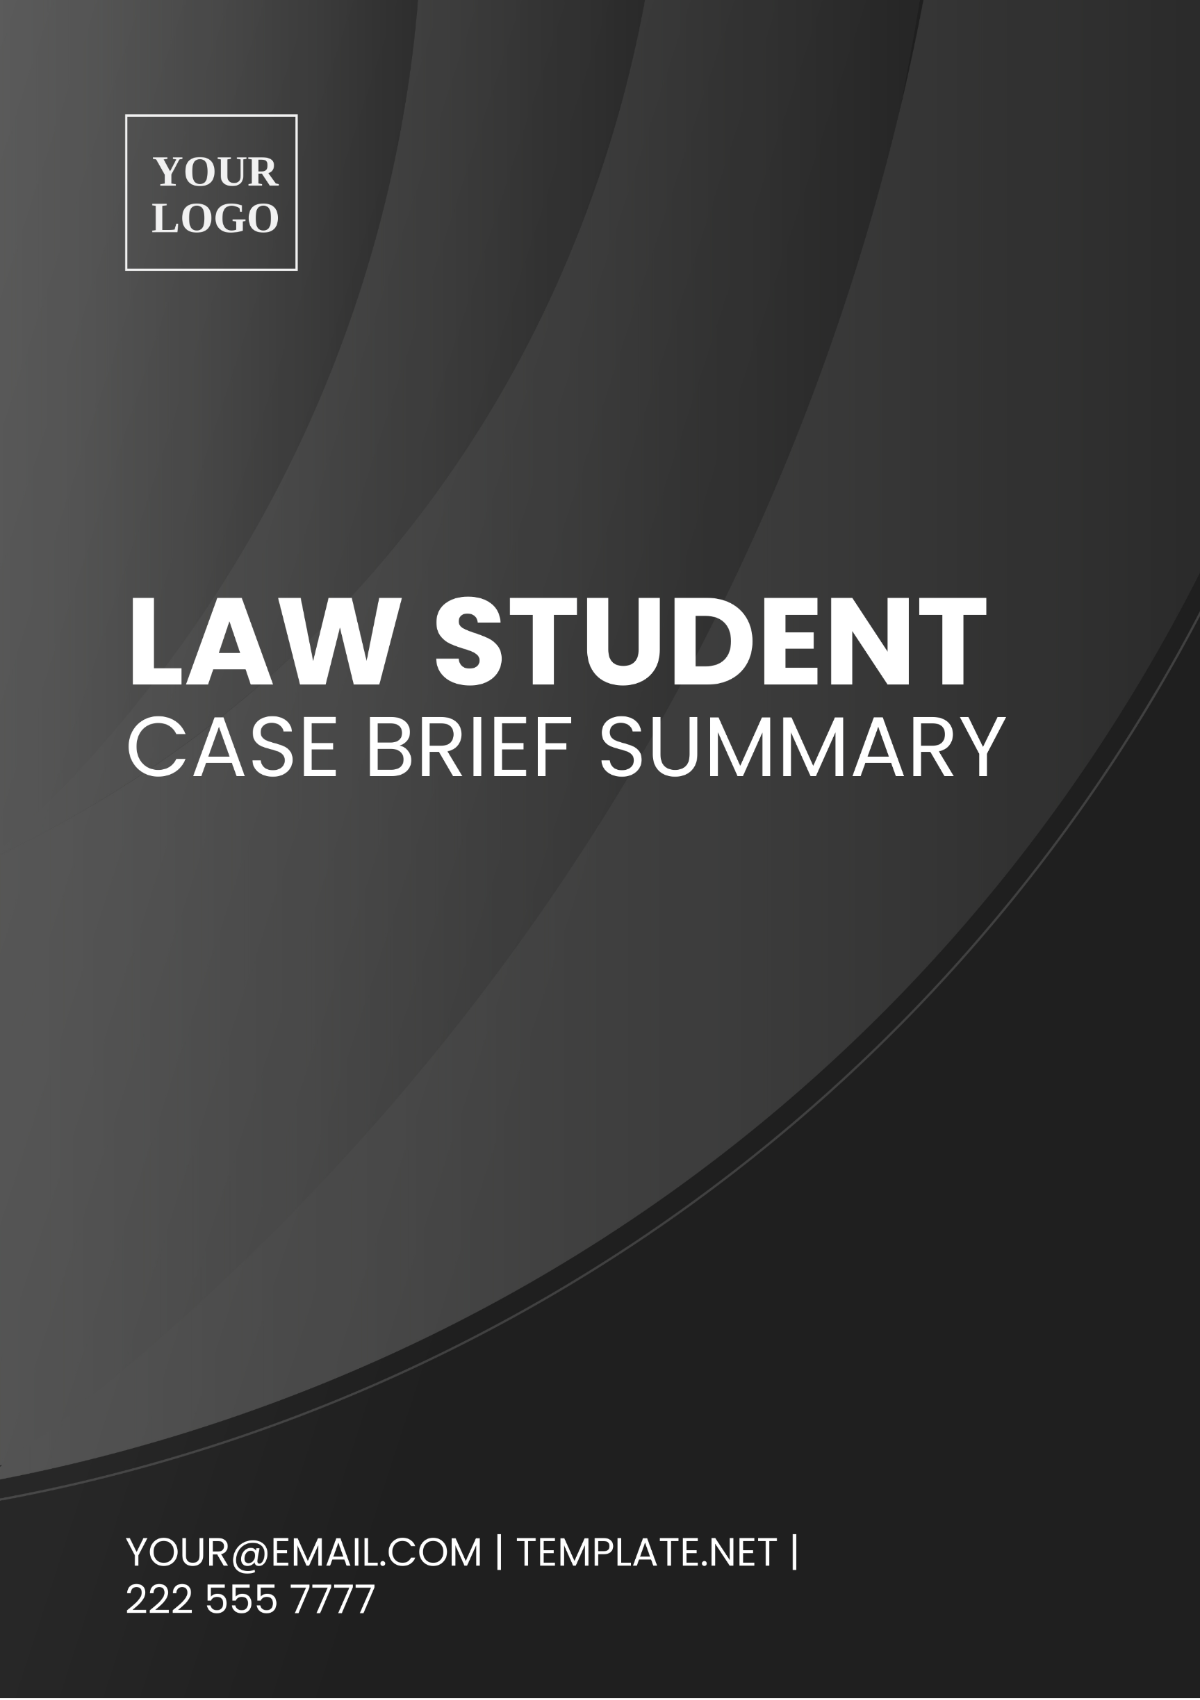 Free Law Student Case Brief Summary Template